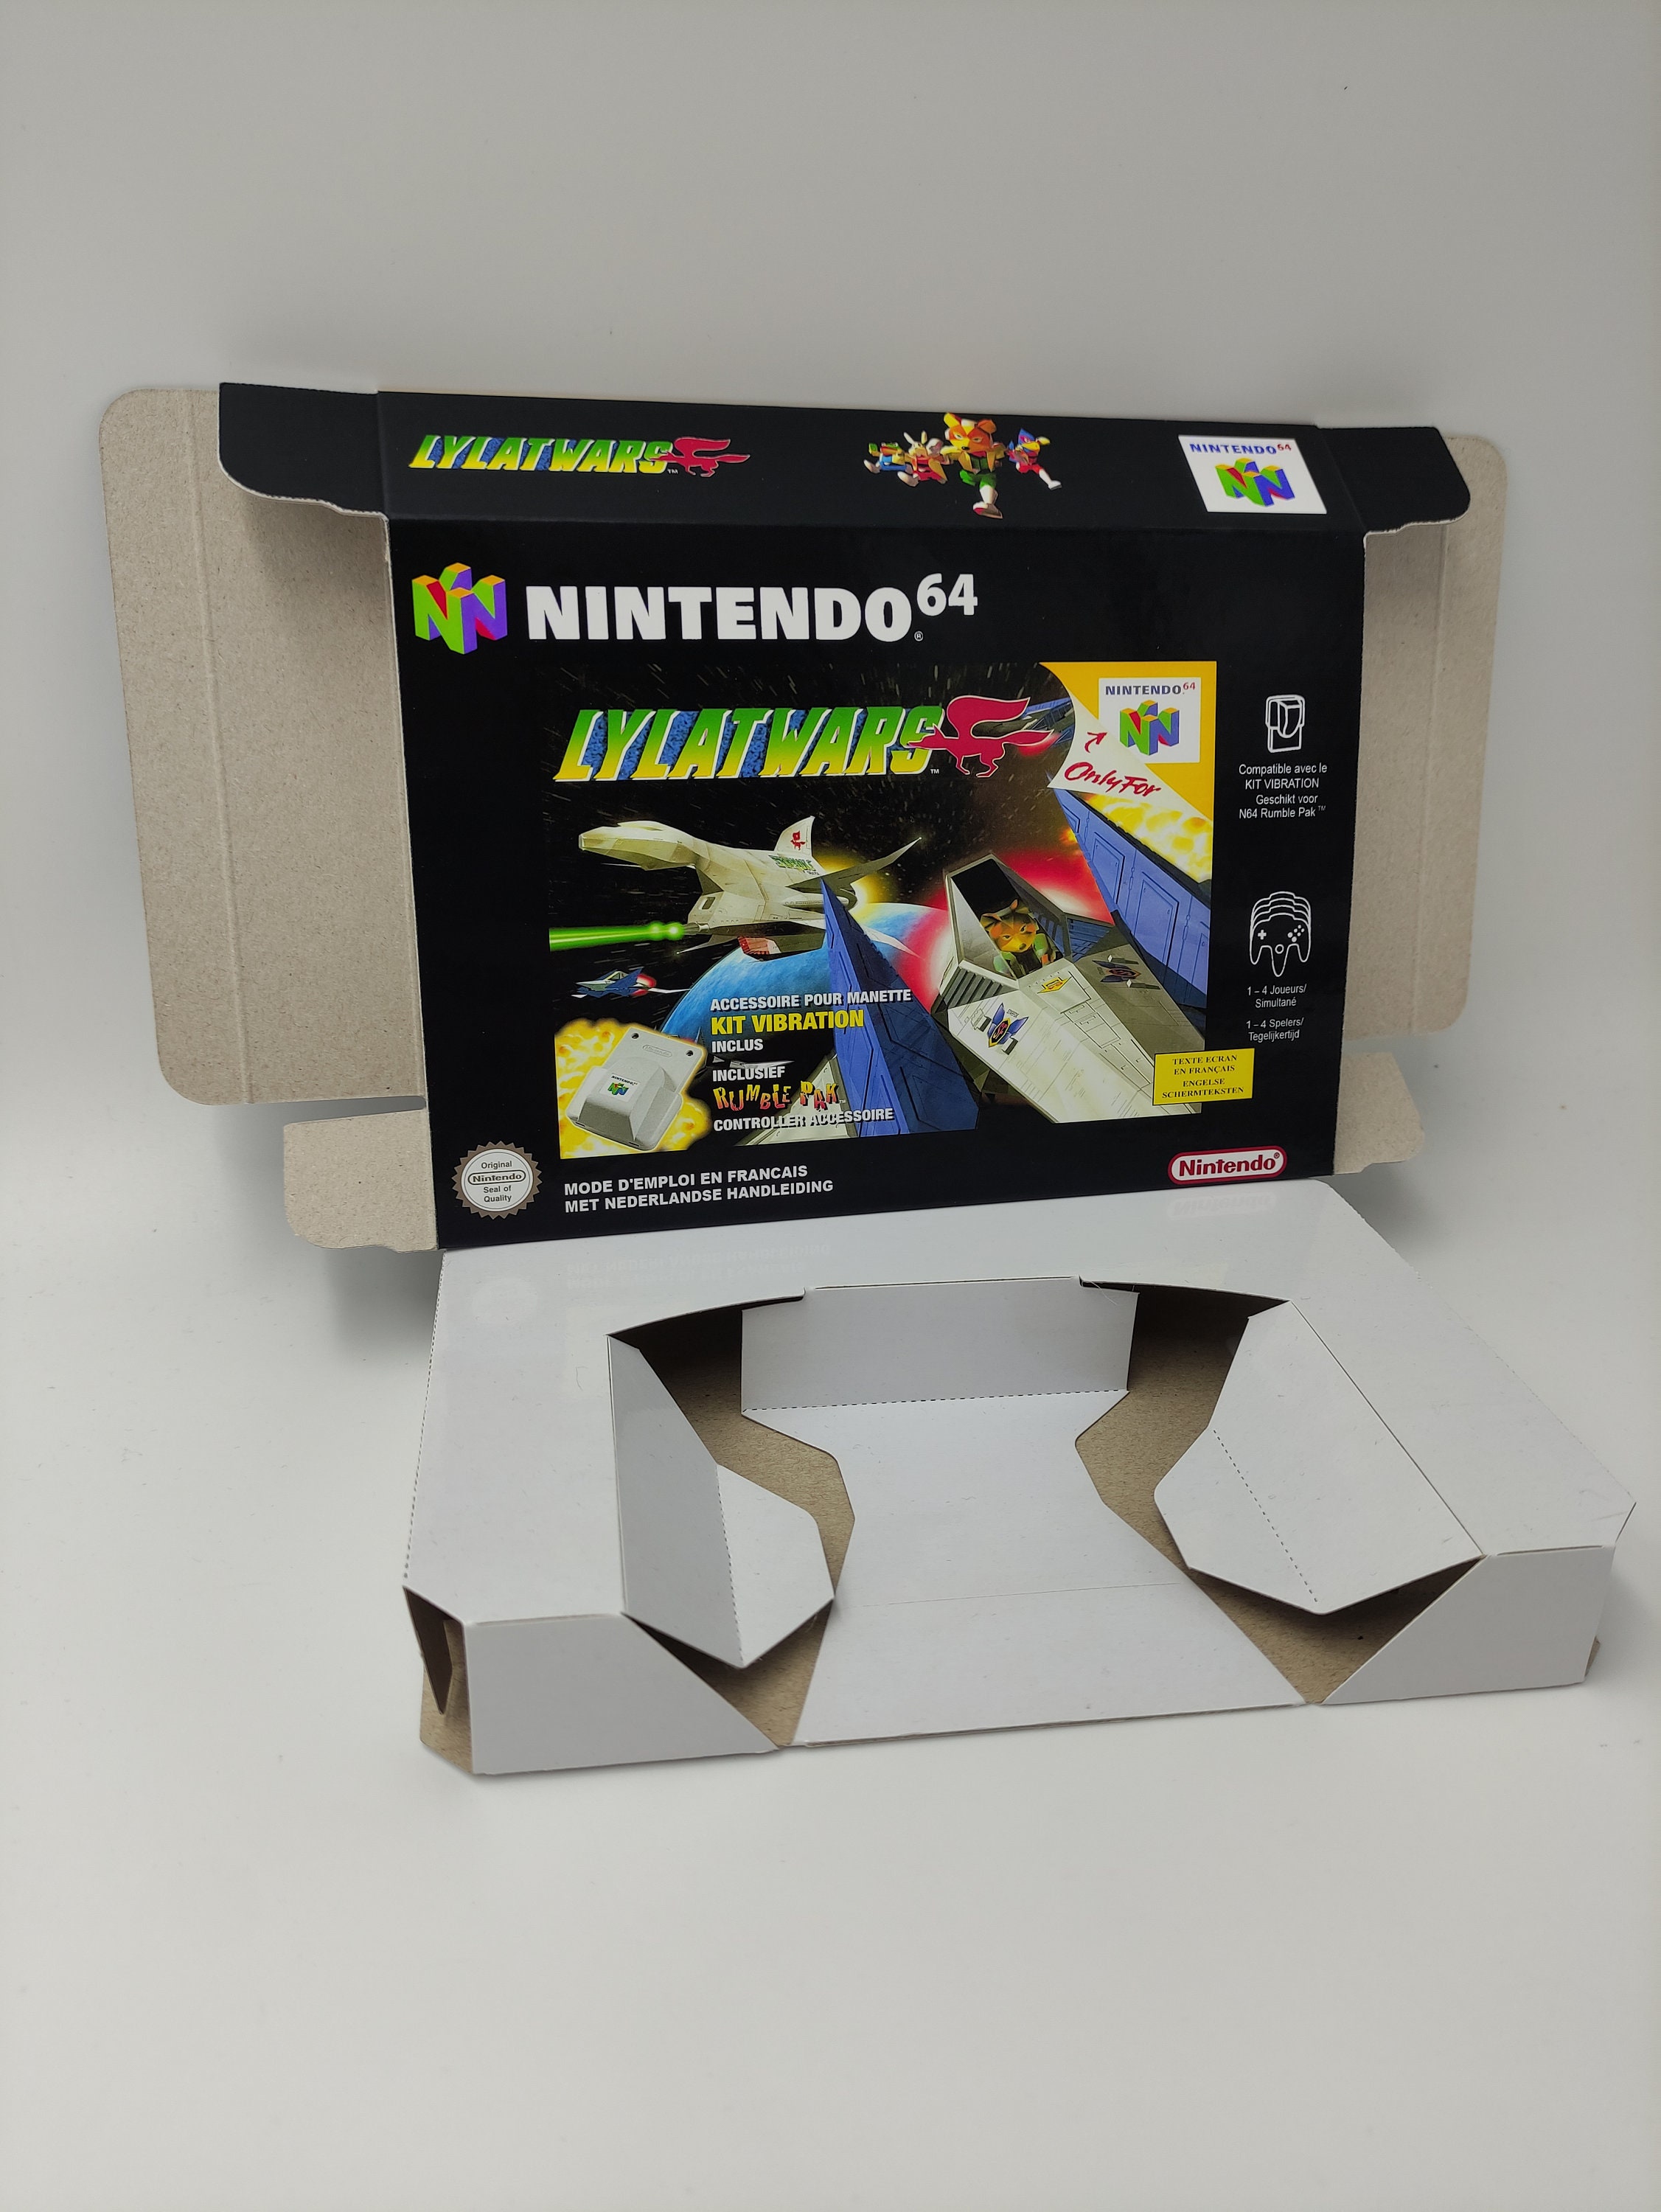 Star Fox 64/ Lylat Wars Replacement Box With Inner Tray 